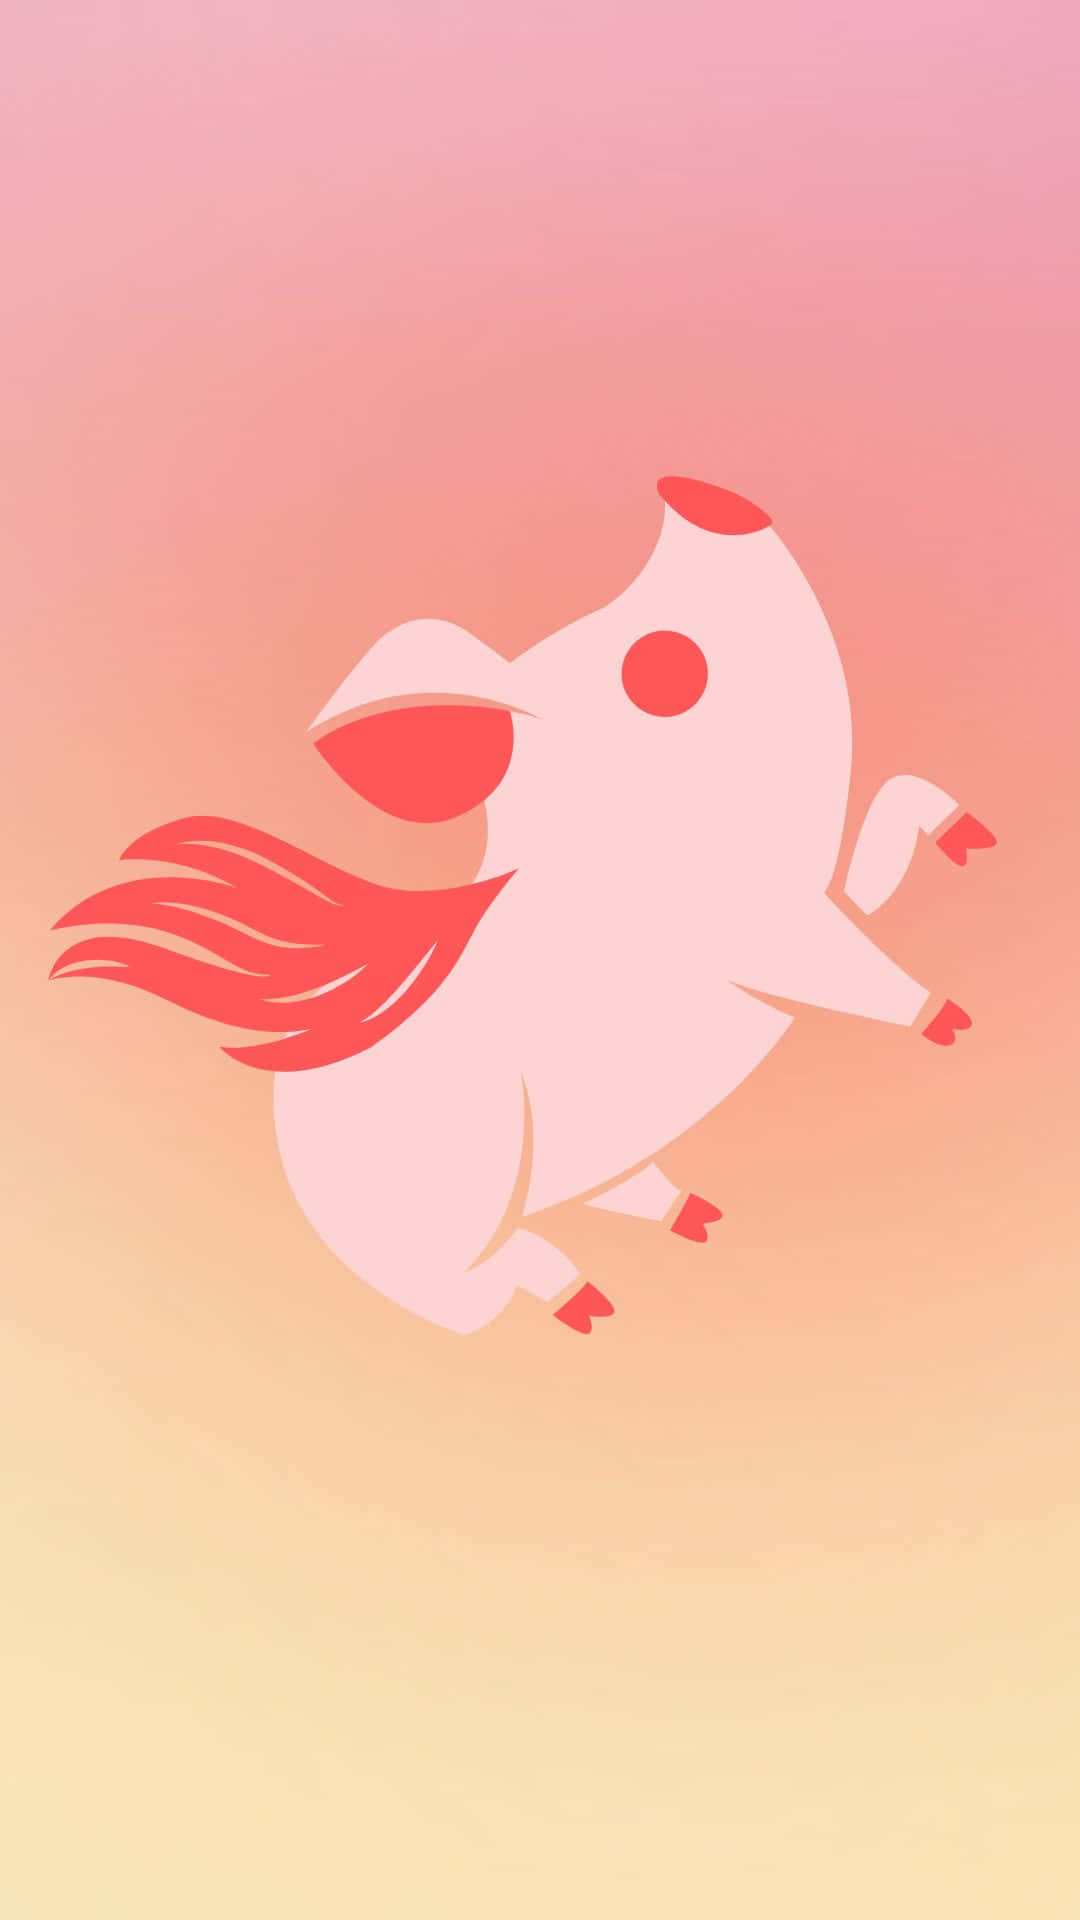 A Pink Pig Flying In The Sky Background